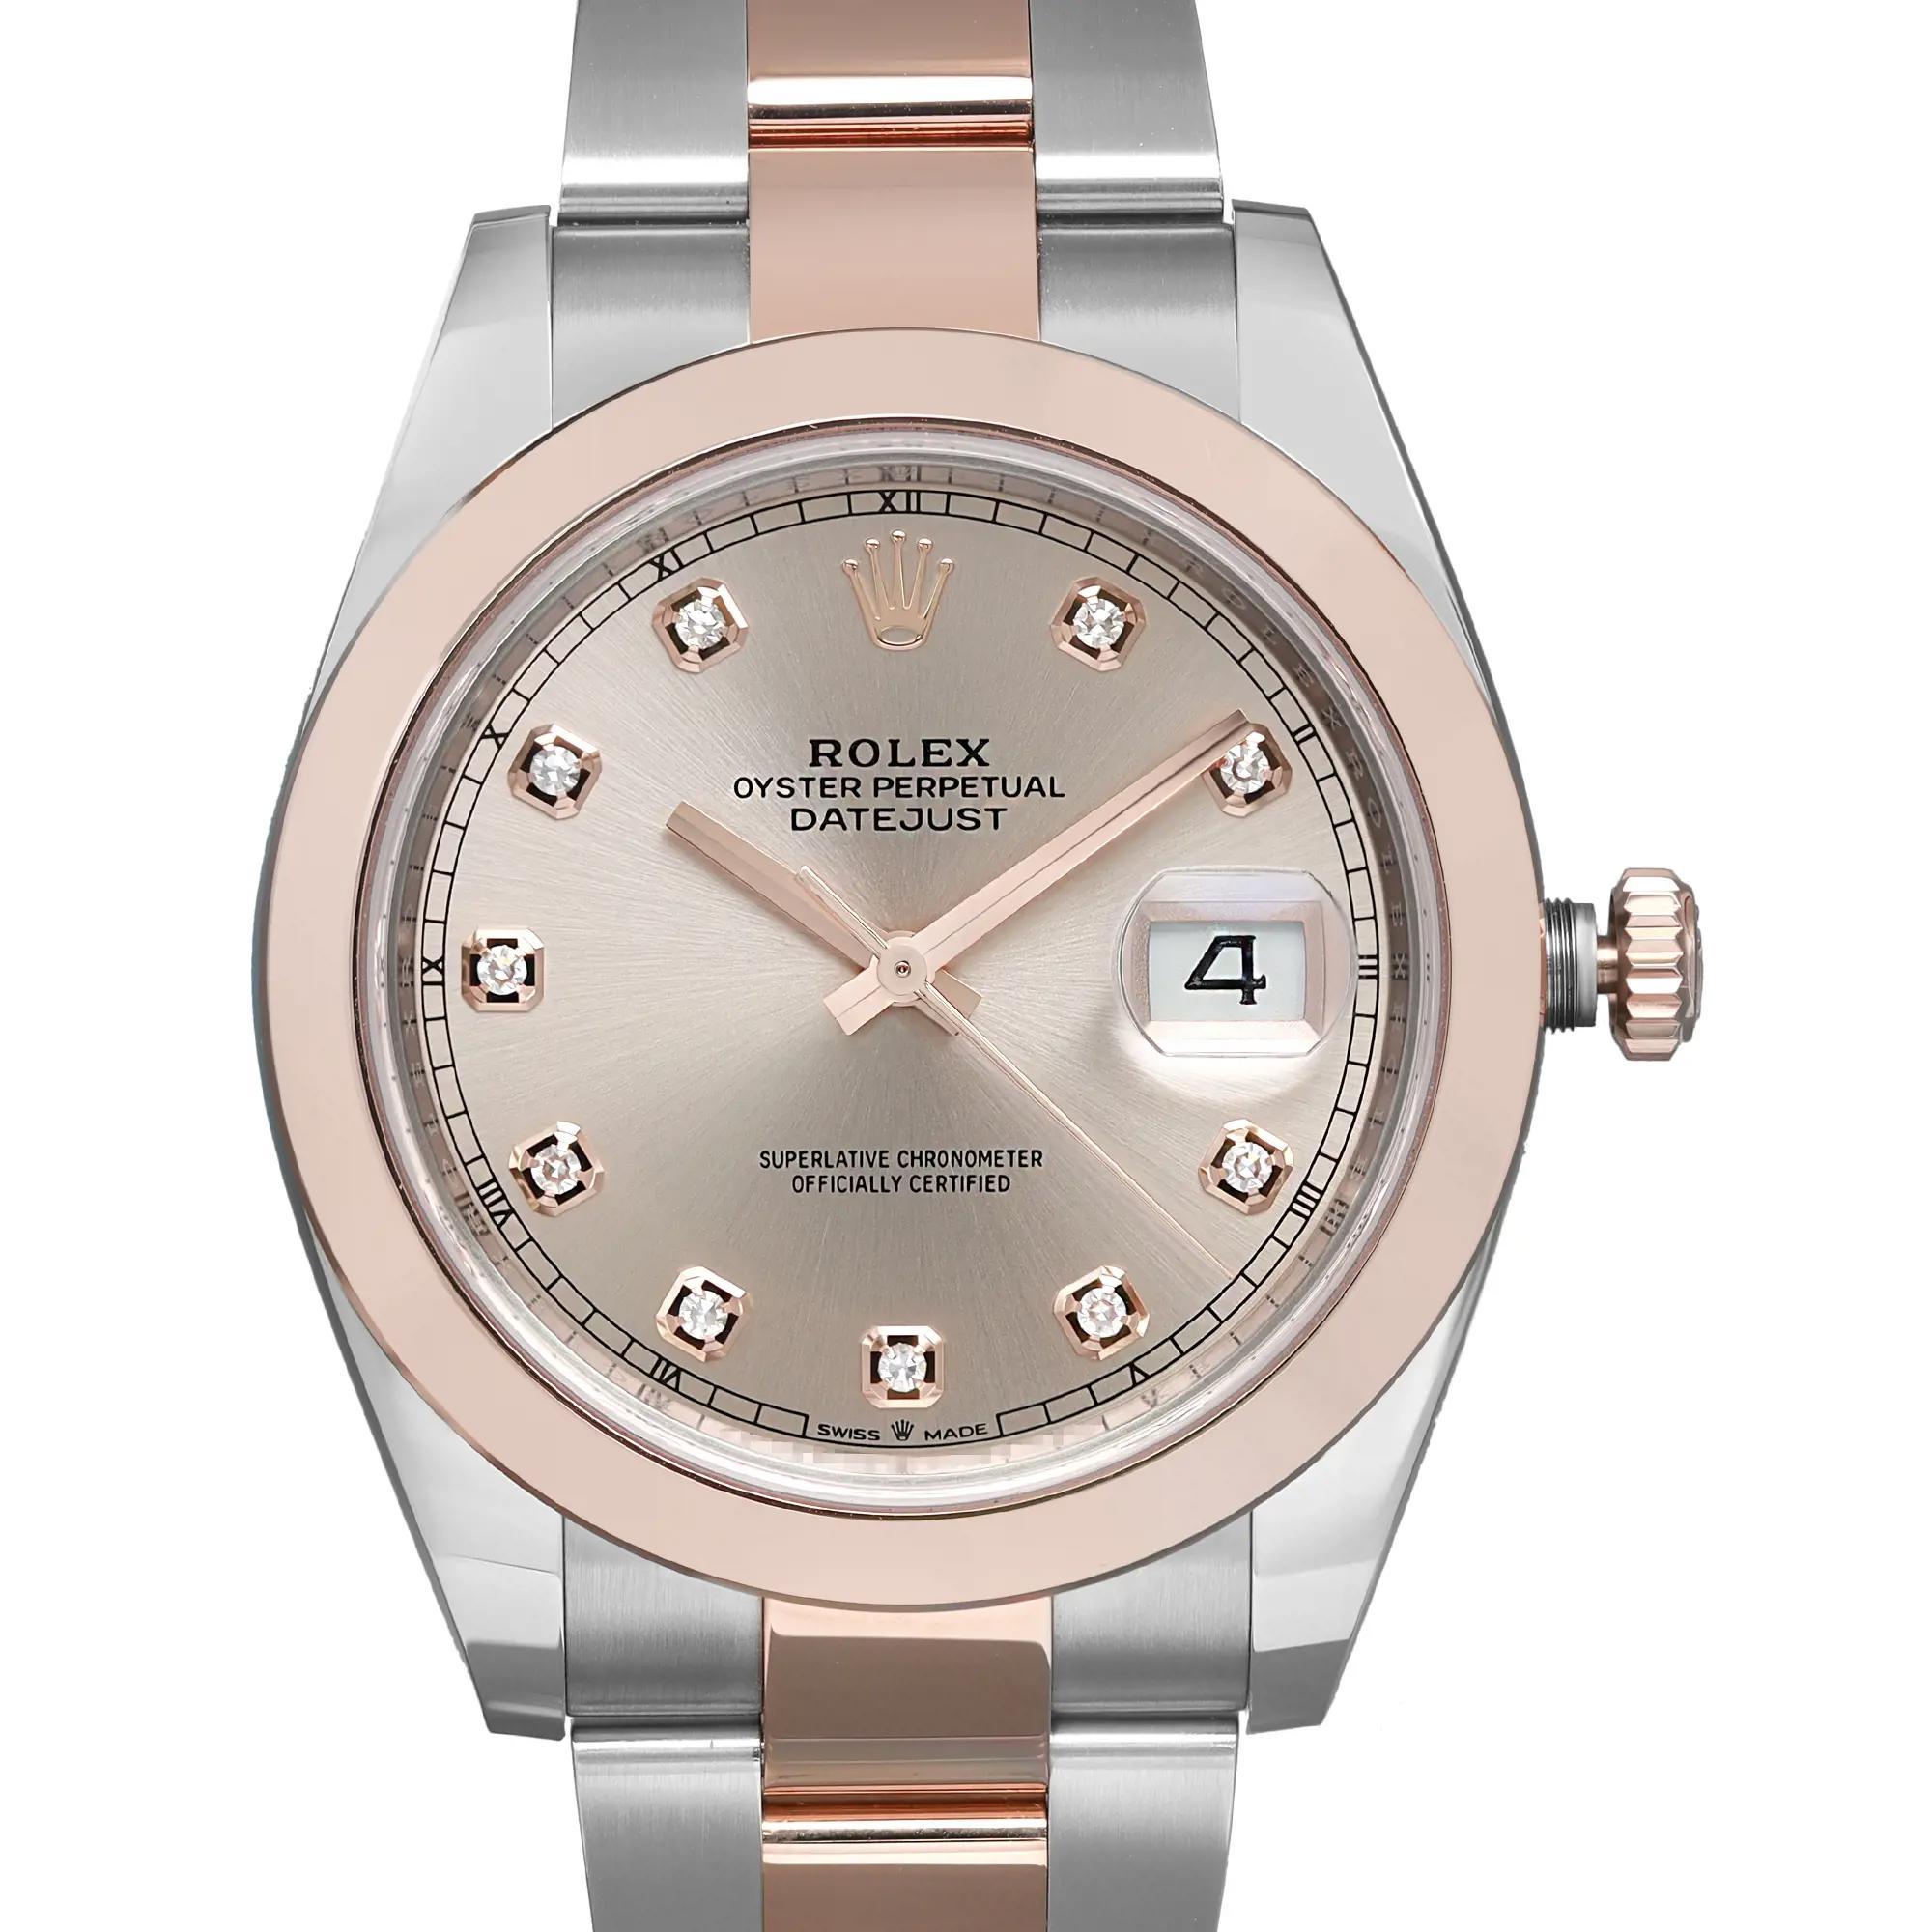 Brand new 2023. Comes with a box and papers. 

General Information
Brand: Rolex
Model: Datejust 126301
Type: Wristwatch
Department: Men
Country/Region of Manufacture: Switzerland
Vintage: No
Year Manufactured: 2010-Now
Style: Dress/Formal,